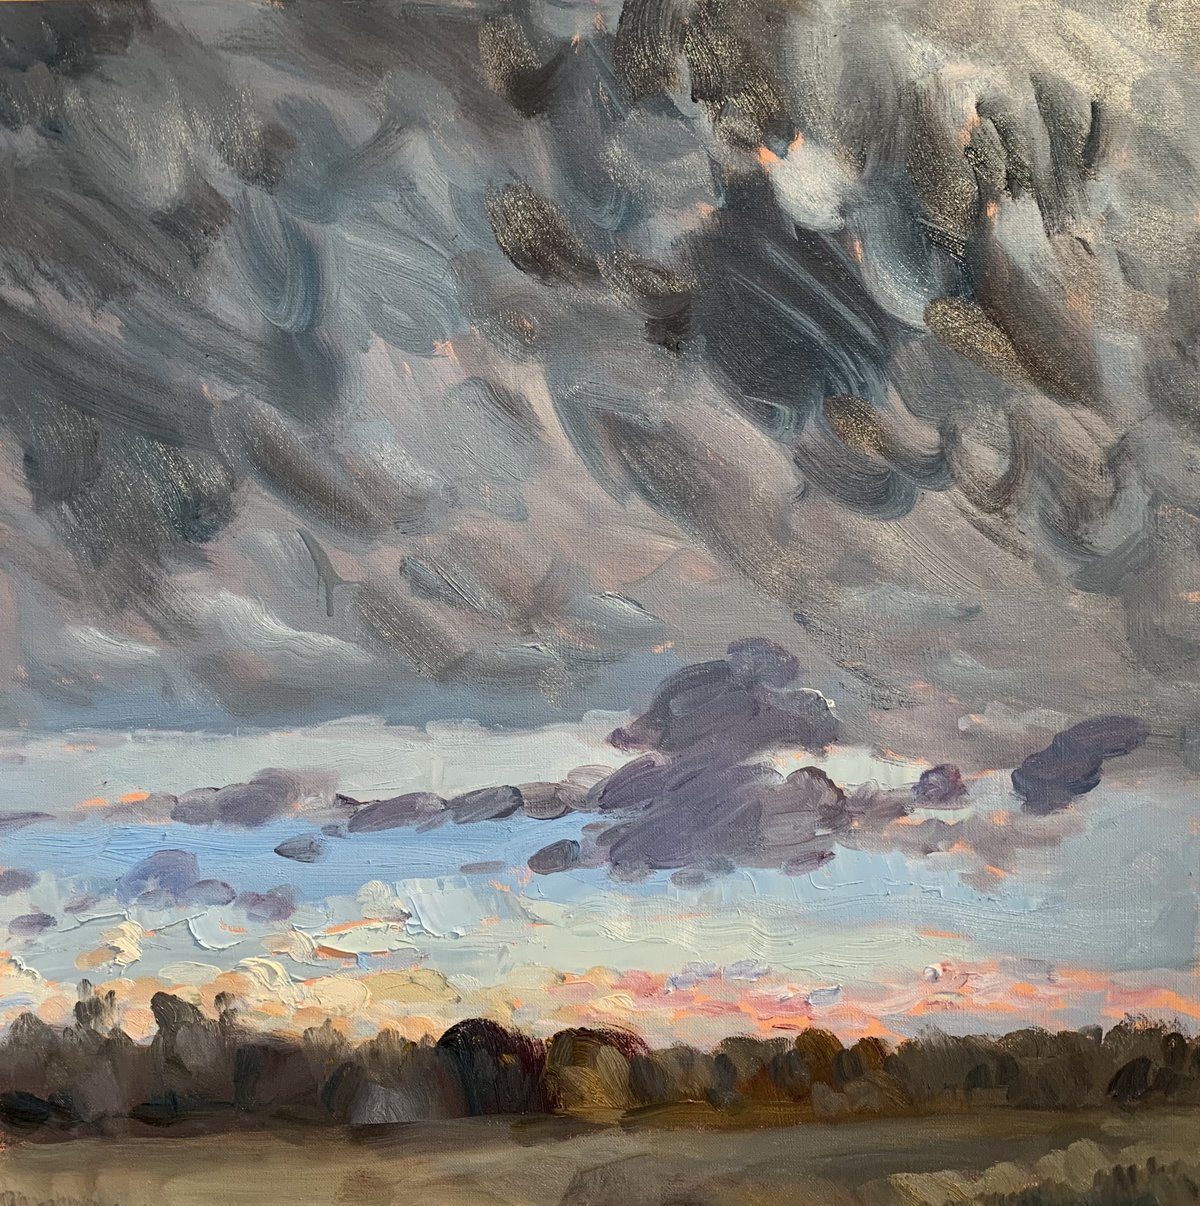 Sunday's Storm over the East End 24x24 ooc $3,500